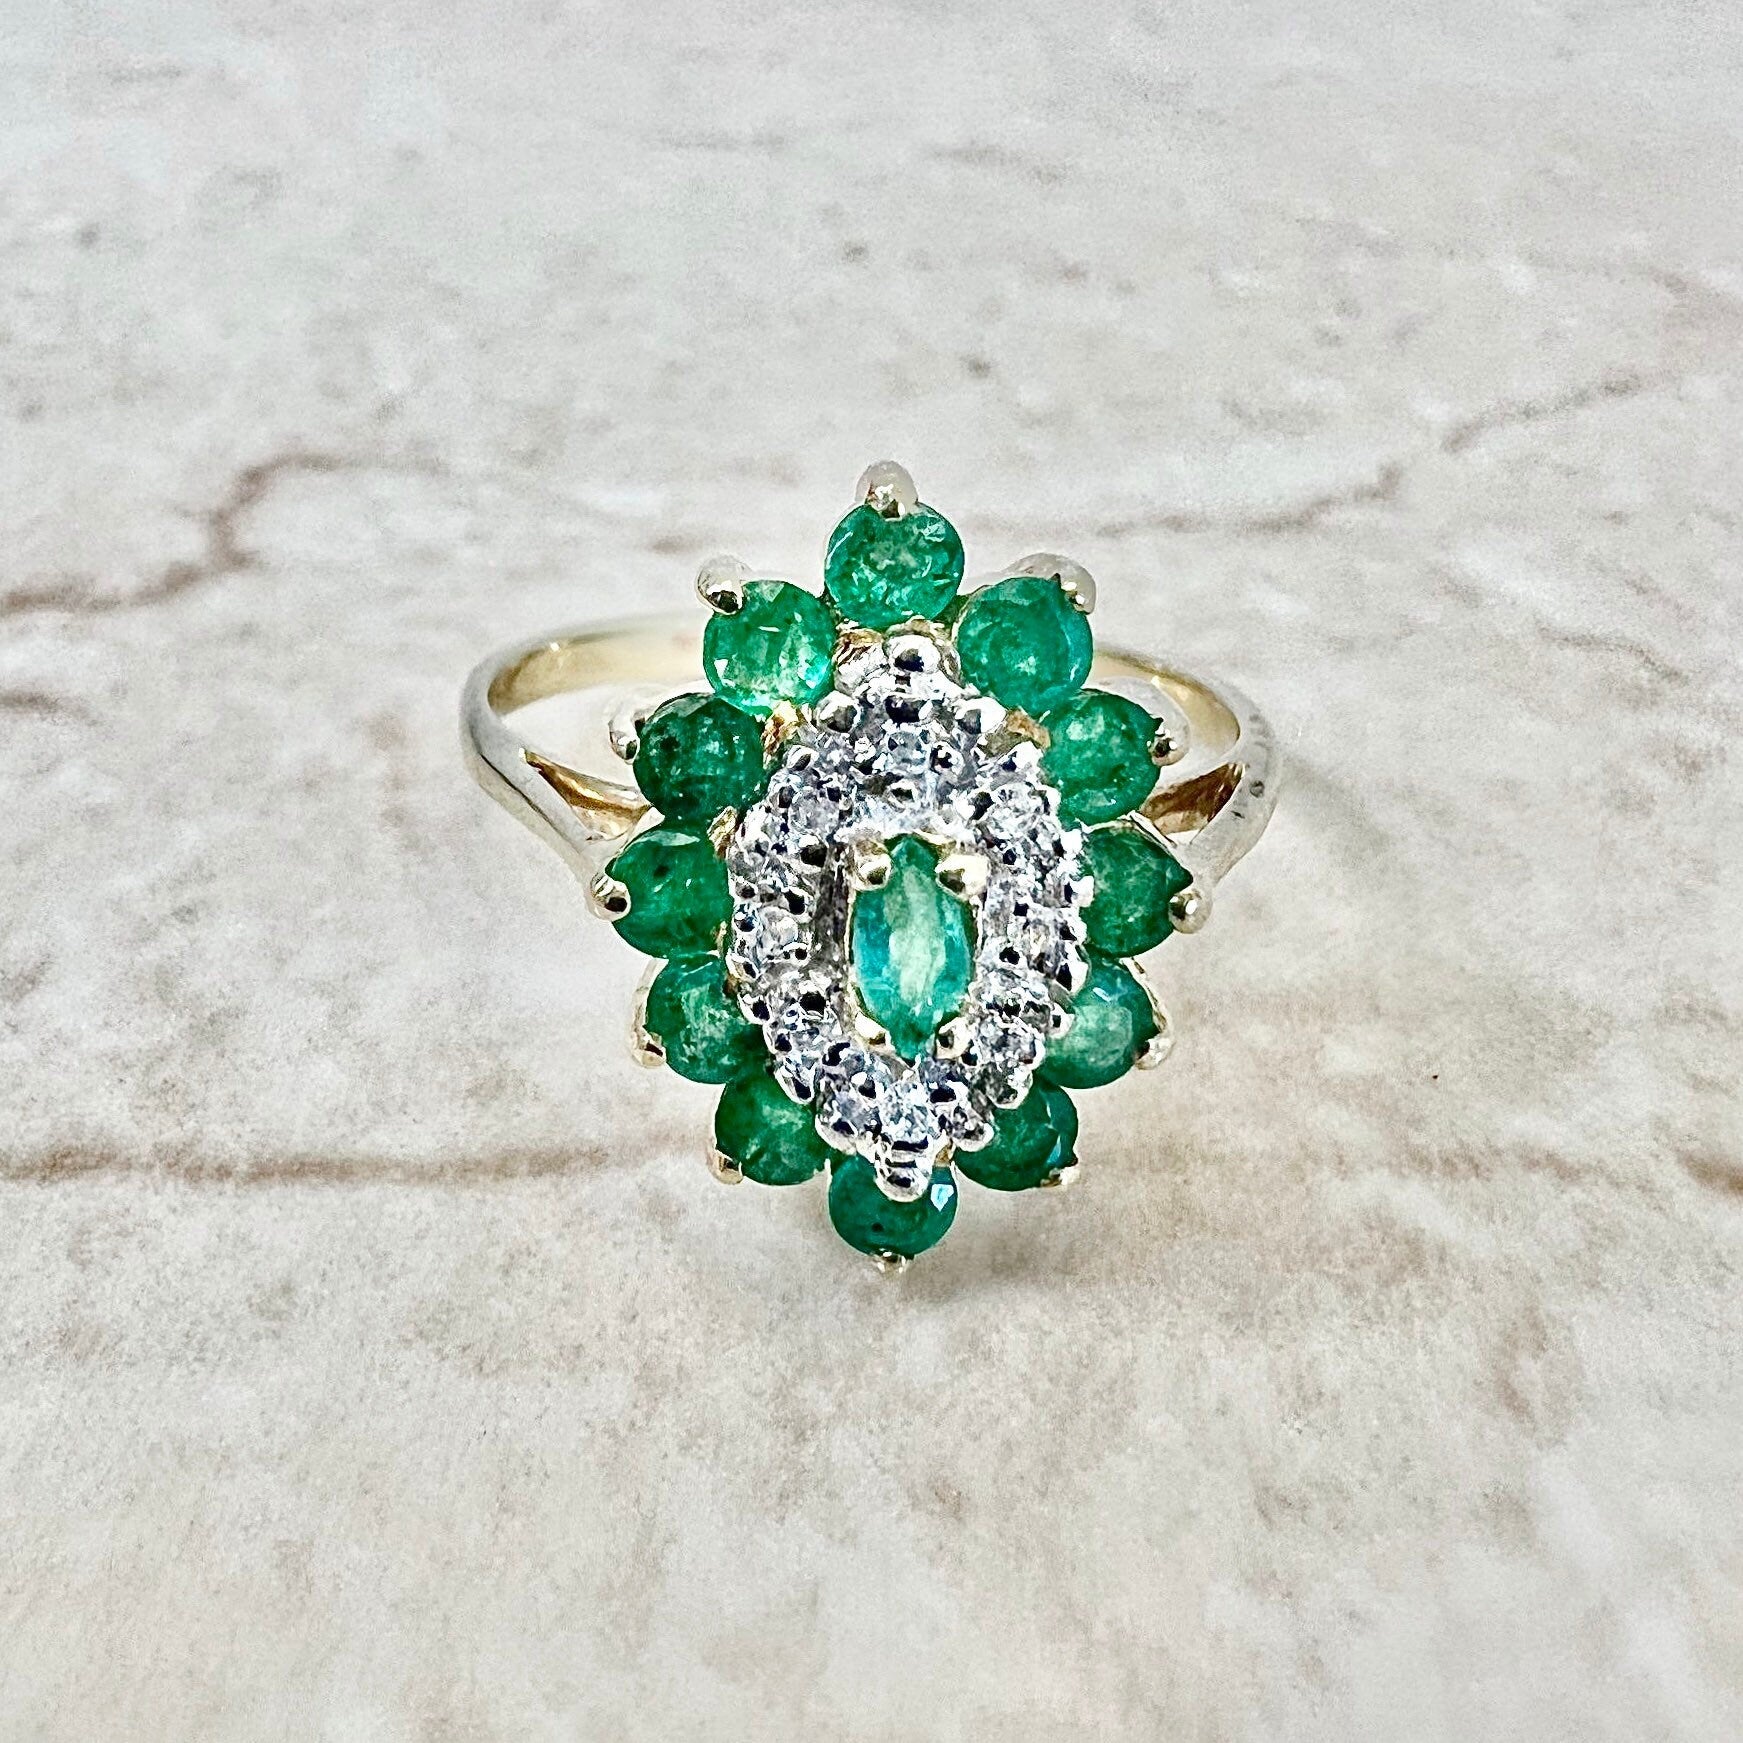 Vintage 10K Natural Emerald & Diamond Halo Ring - 2 Tone Gold Emerald Cocktail Ring - April May Birthstone - Birthday Gift For Her